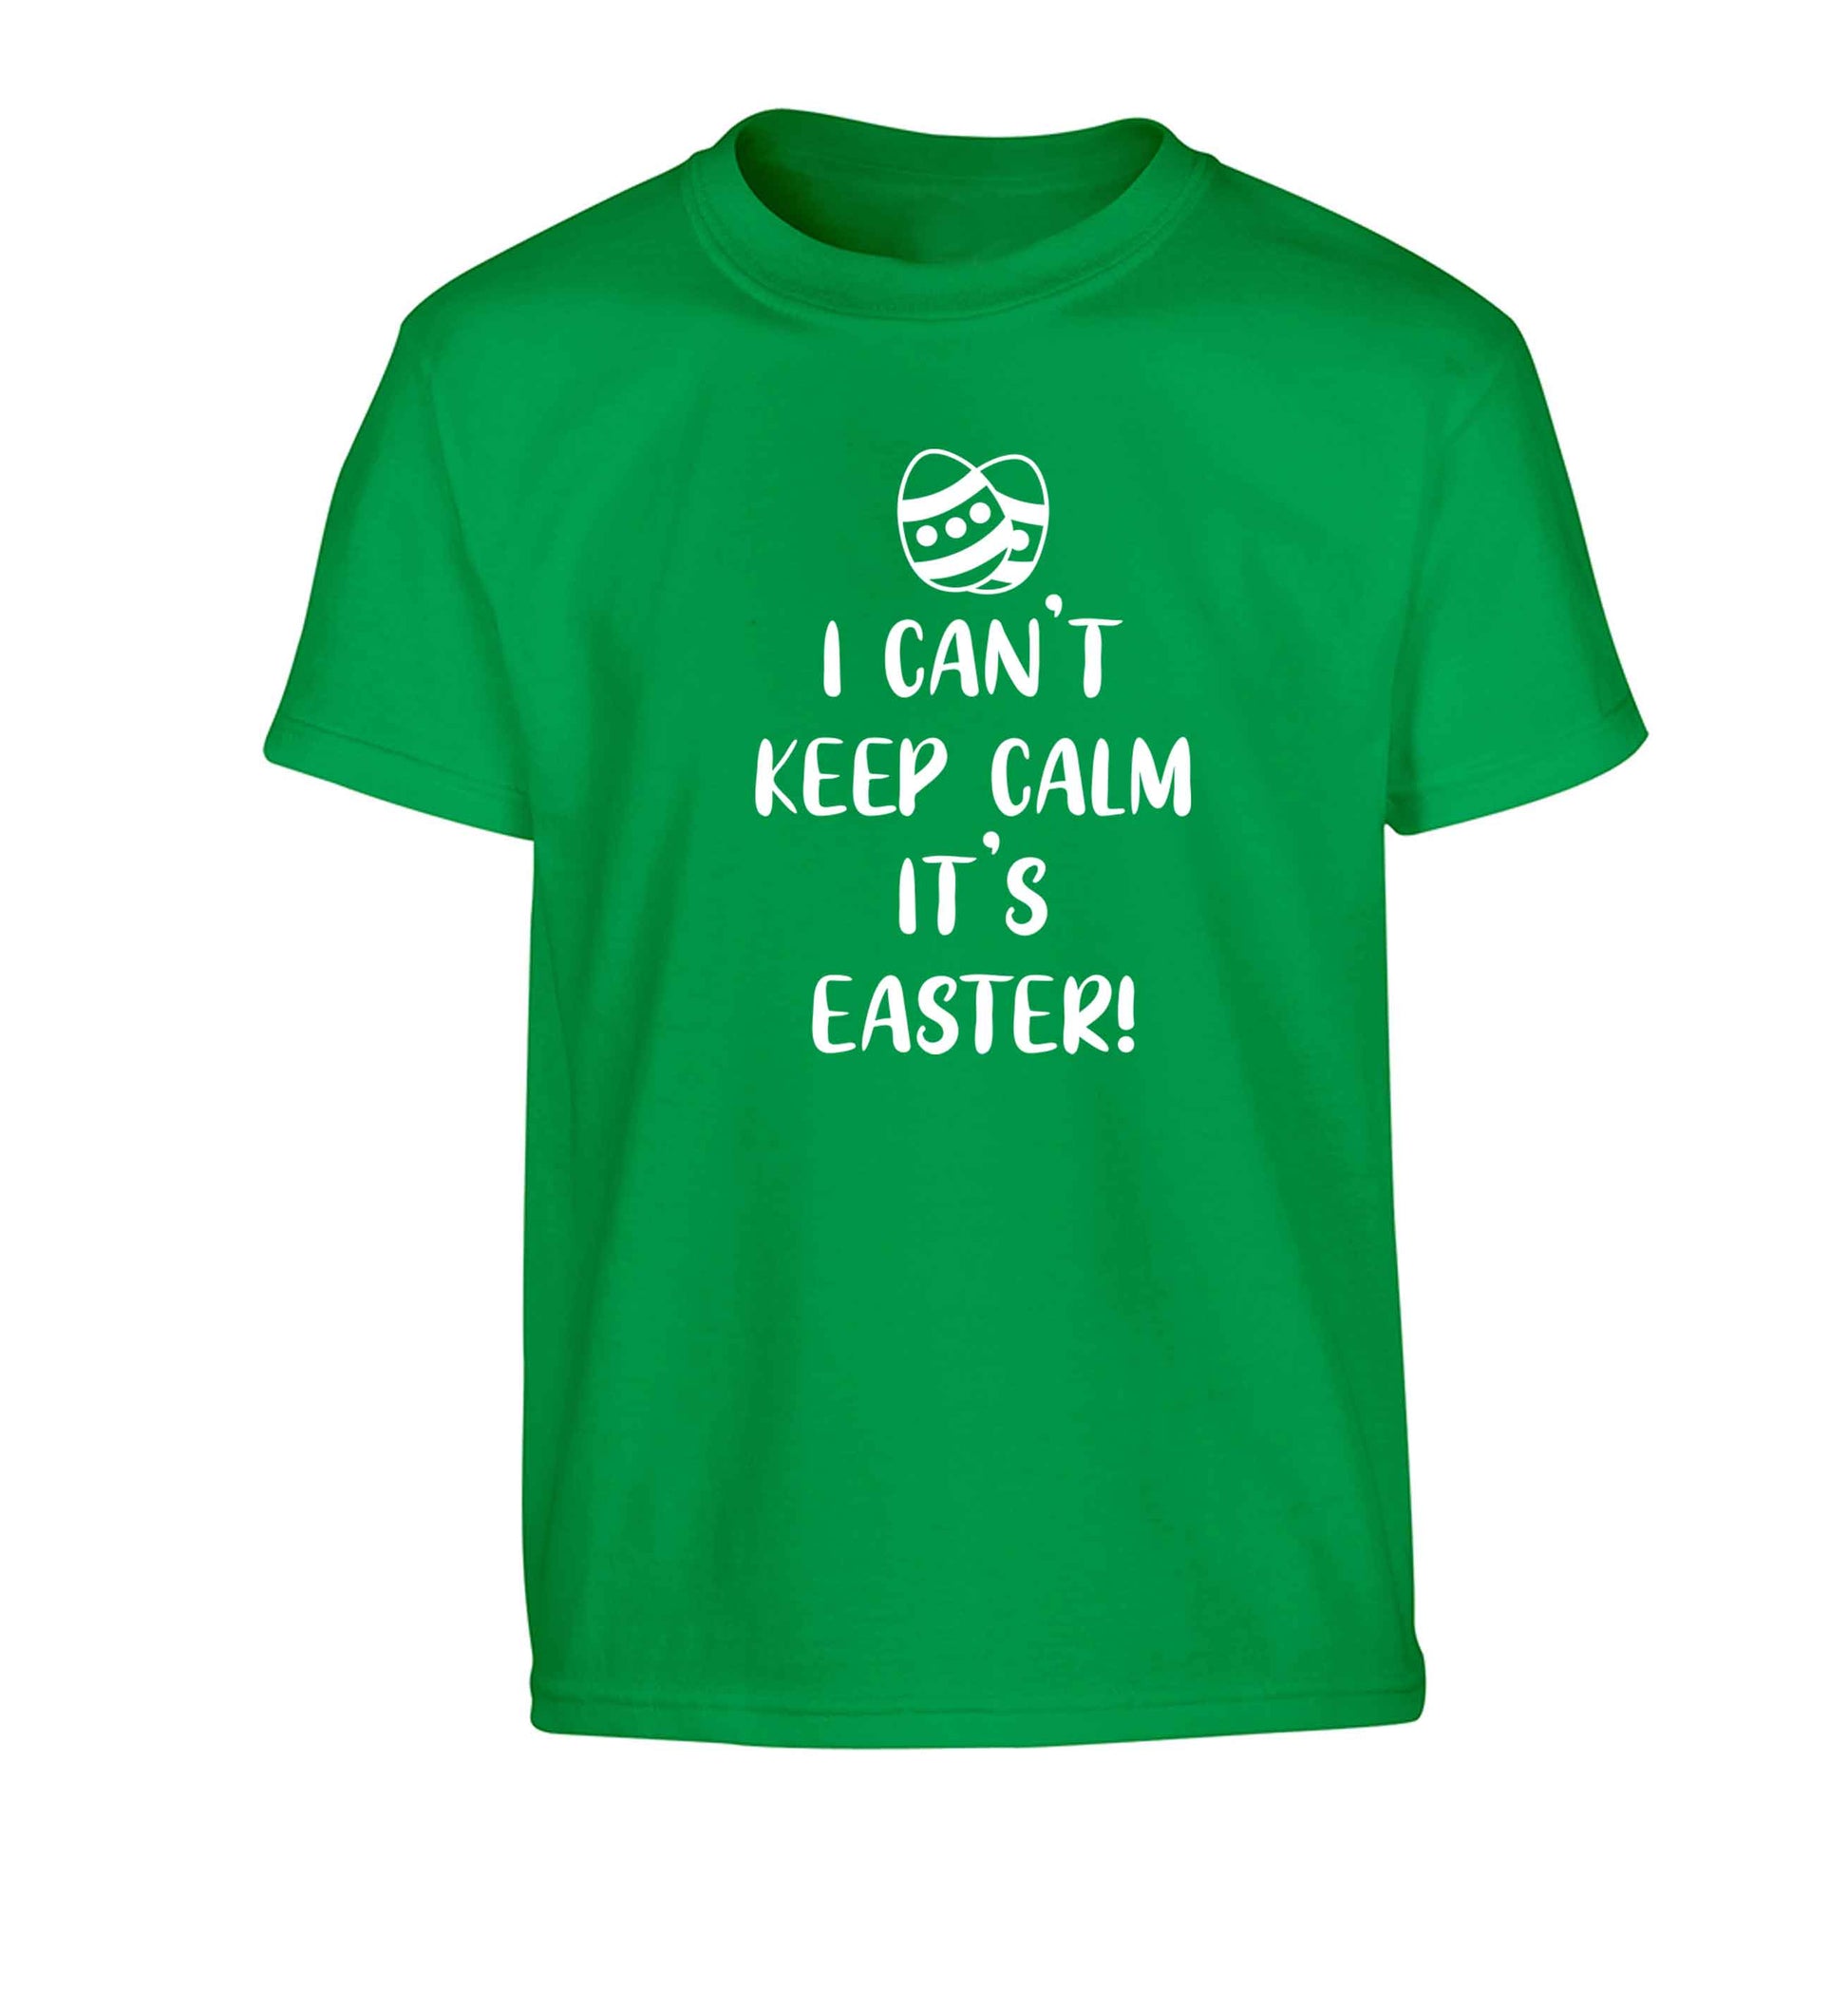 I can't keep calm it's Easter Children's green Tshirt 12-13 Years